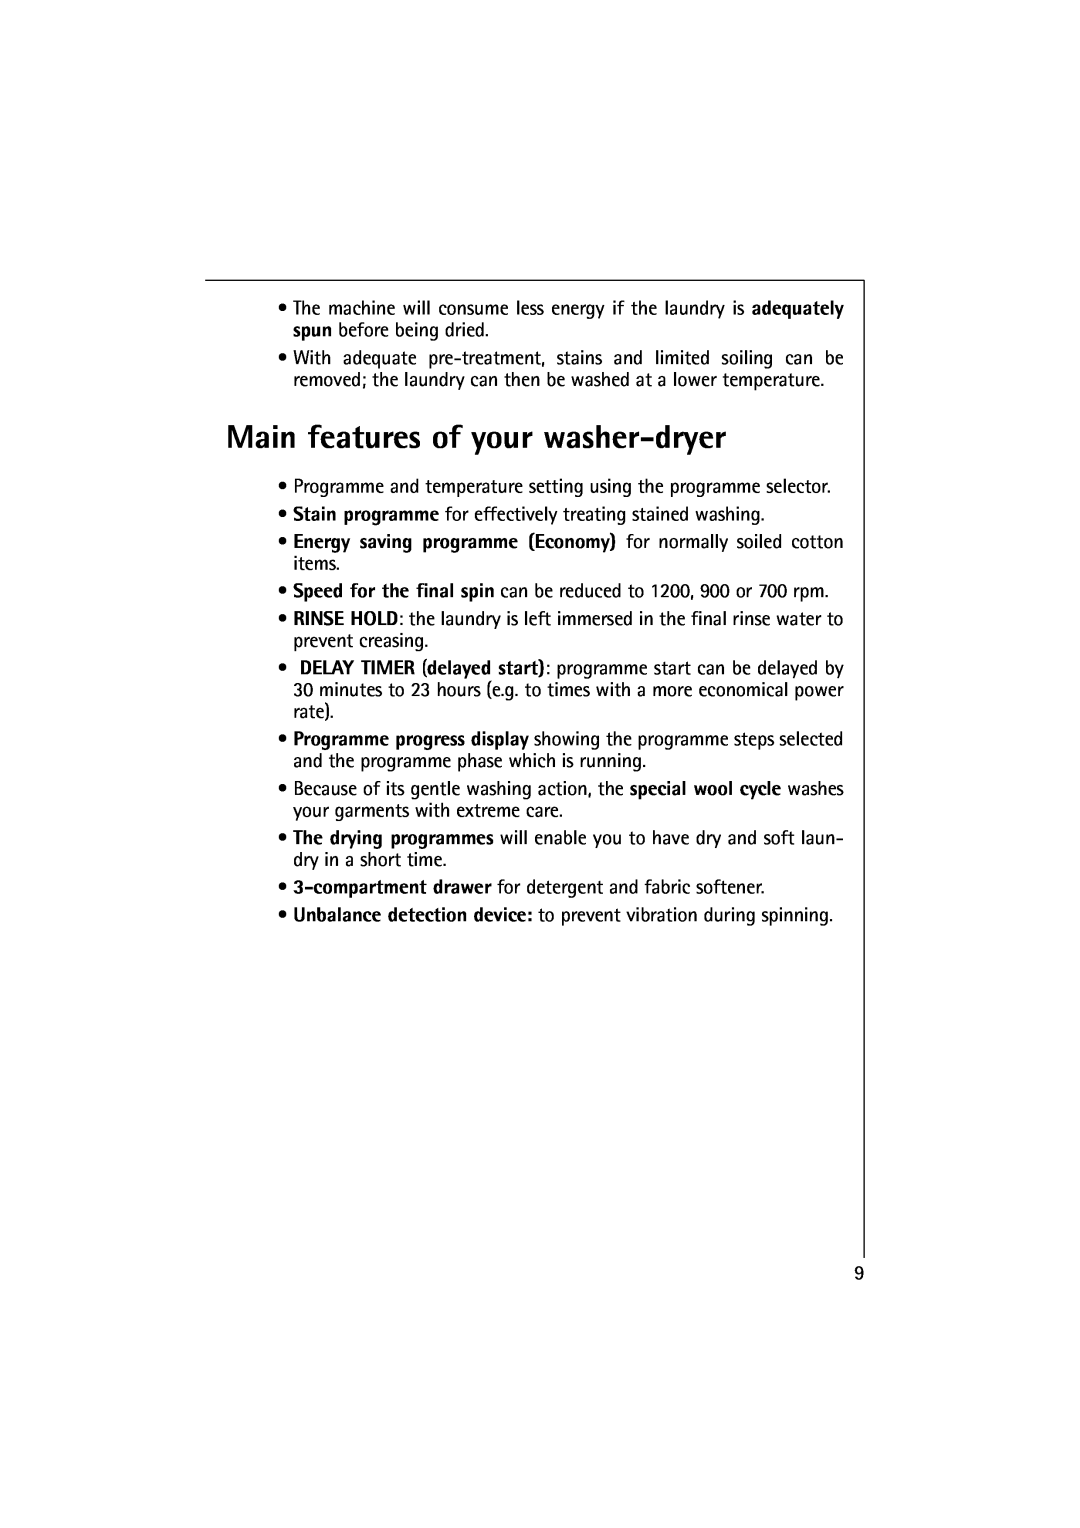 Electrolux 16830 manual Main features of your washer-dryer 